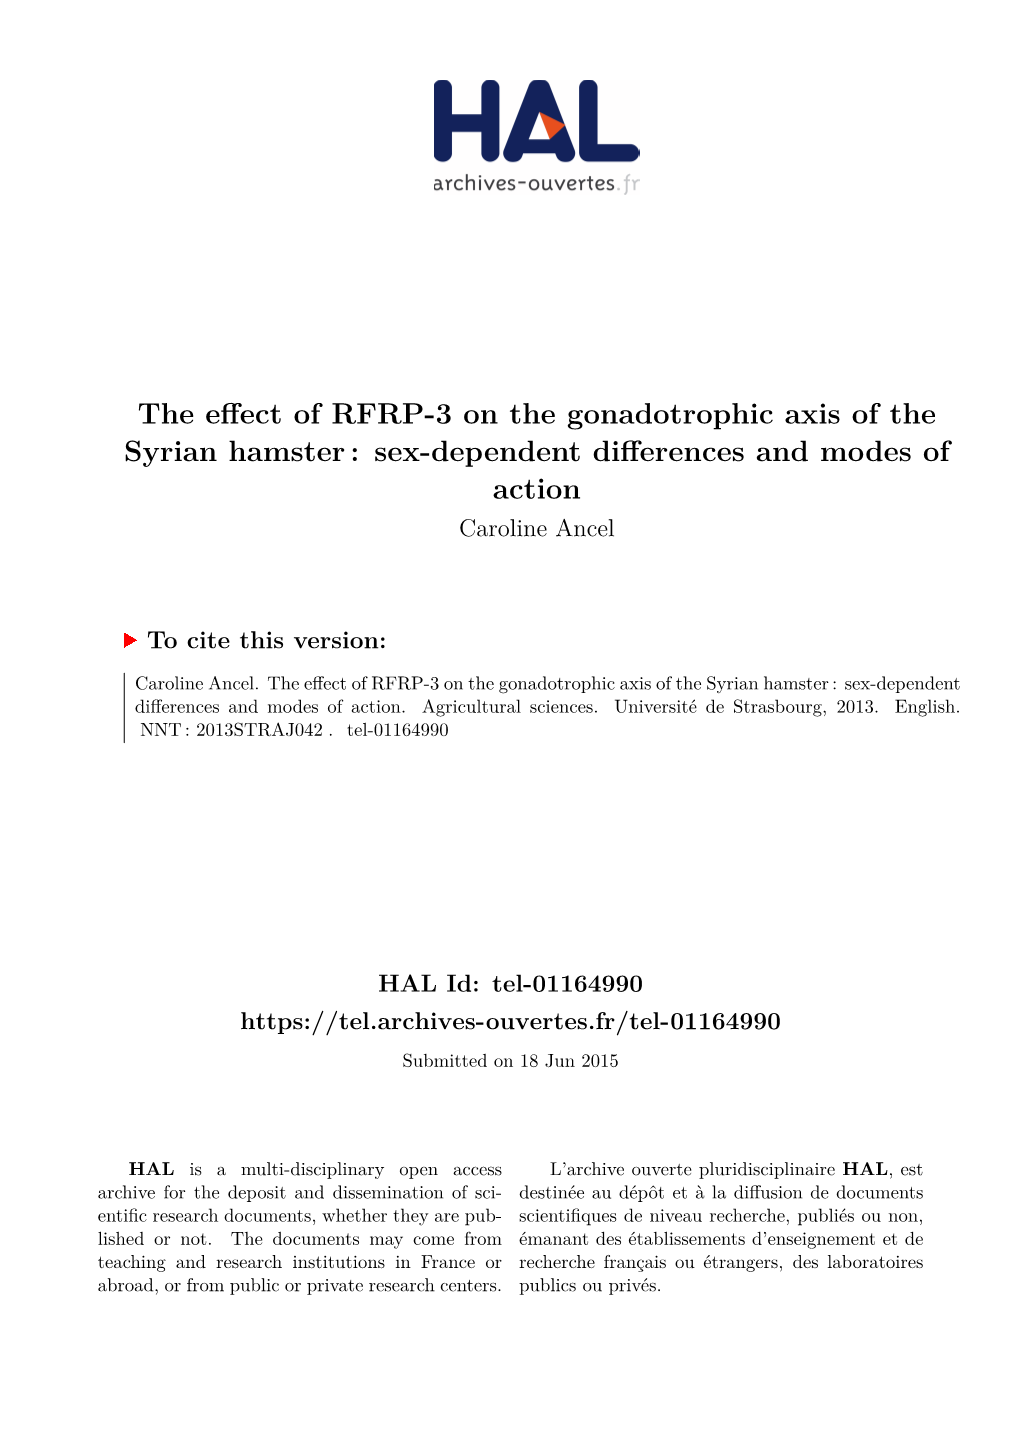 The Effect of RFRP-3 on the Gonadotrophic Axis of the Syrian Hamster : Sex-Dependent Differences and Modes of Action